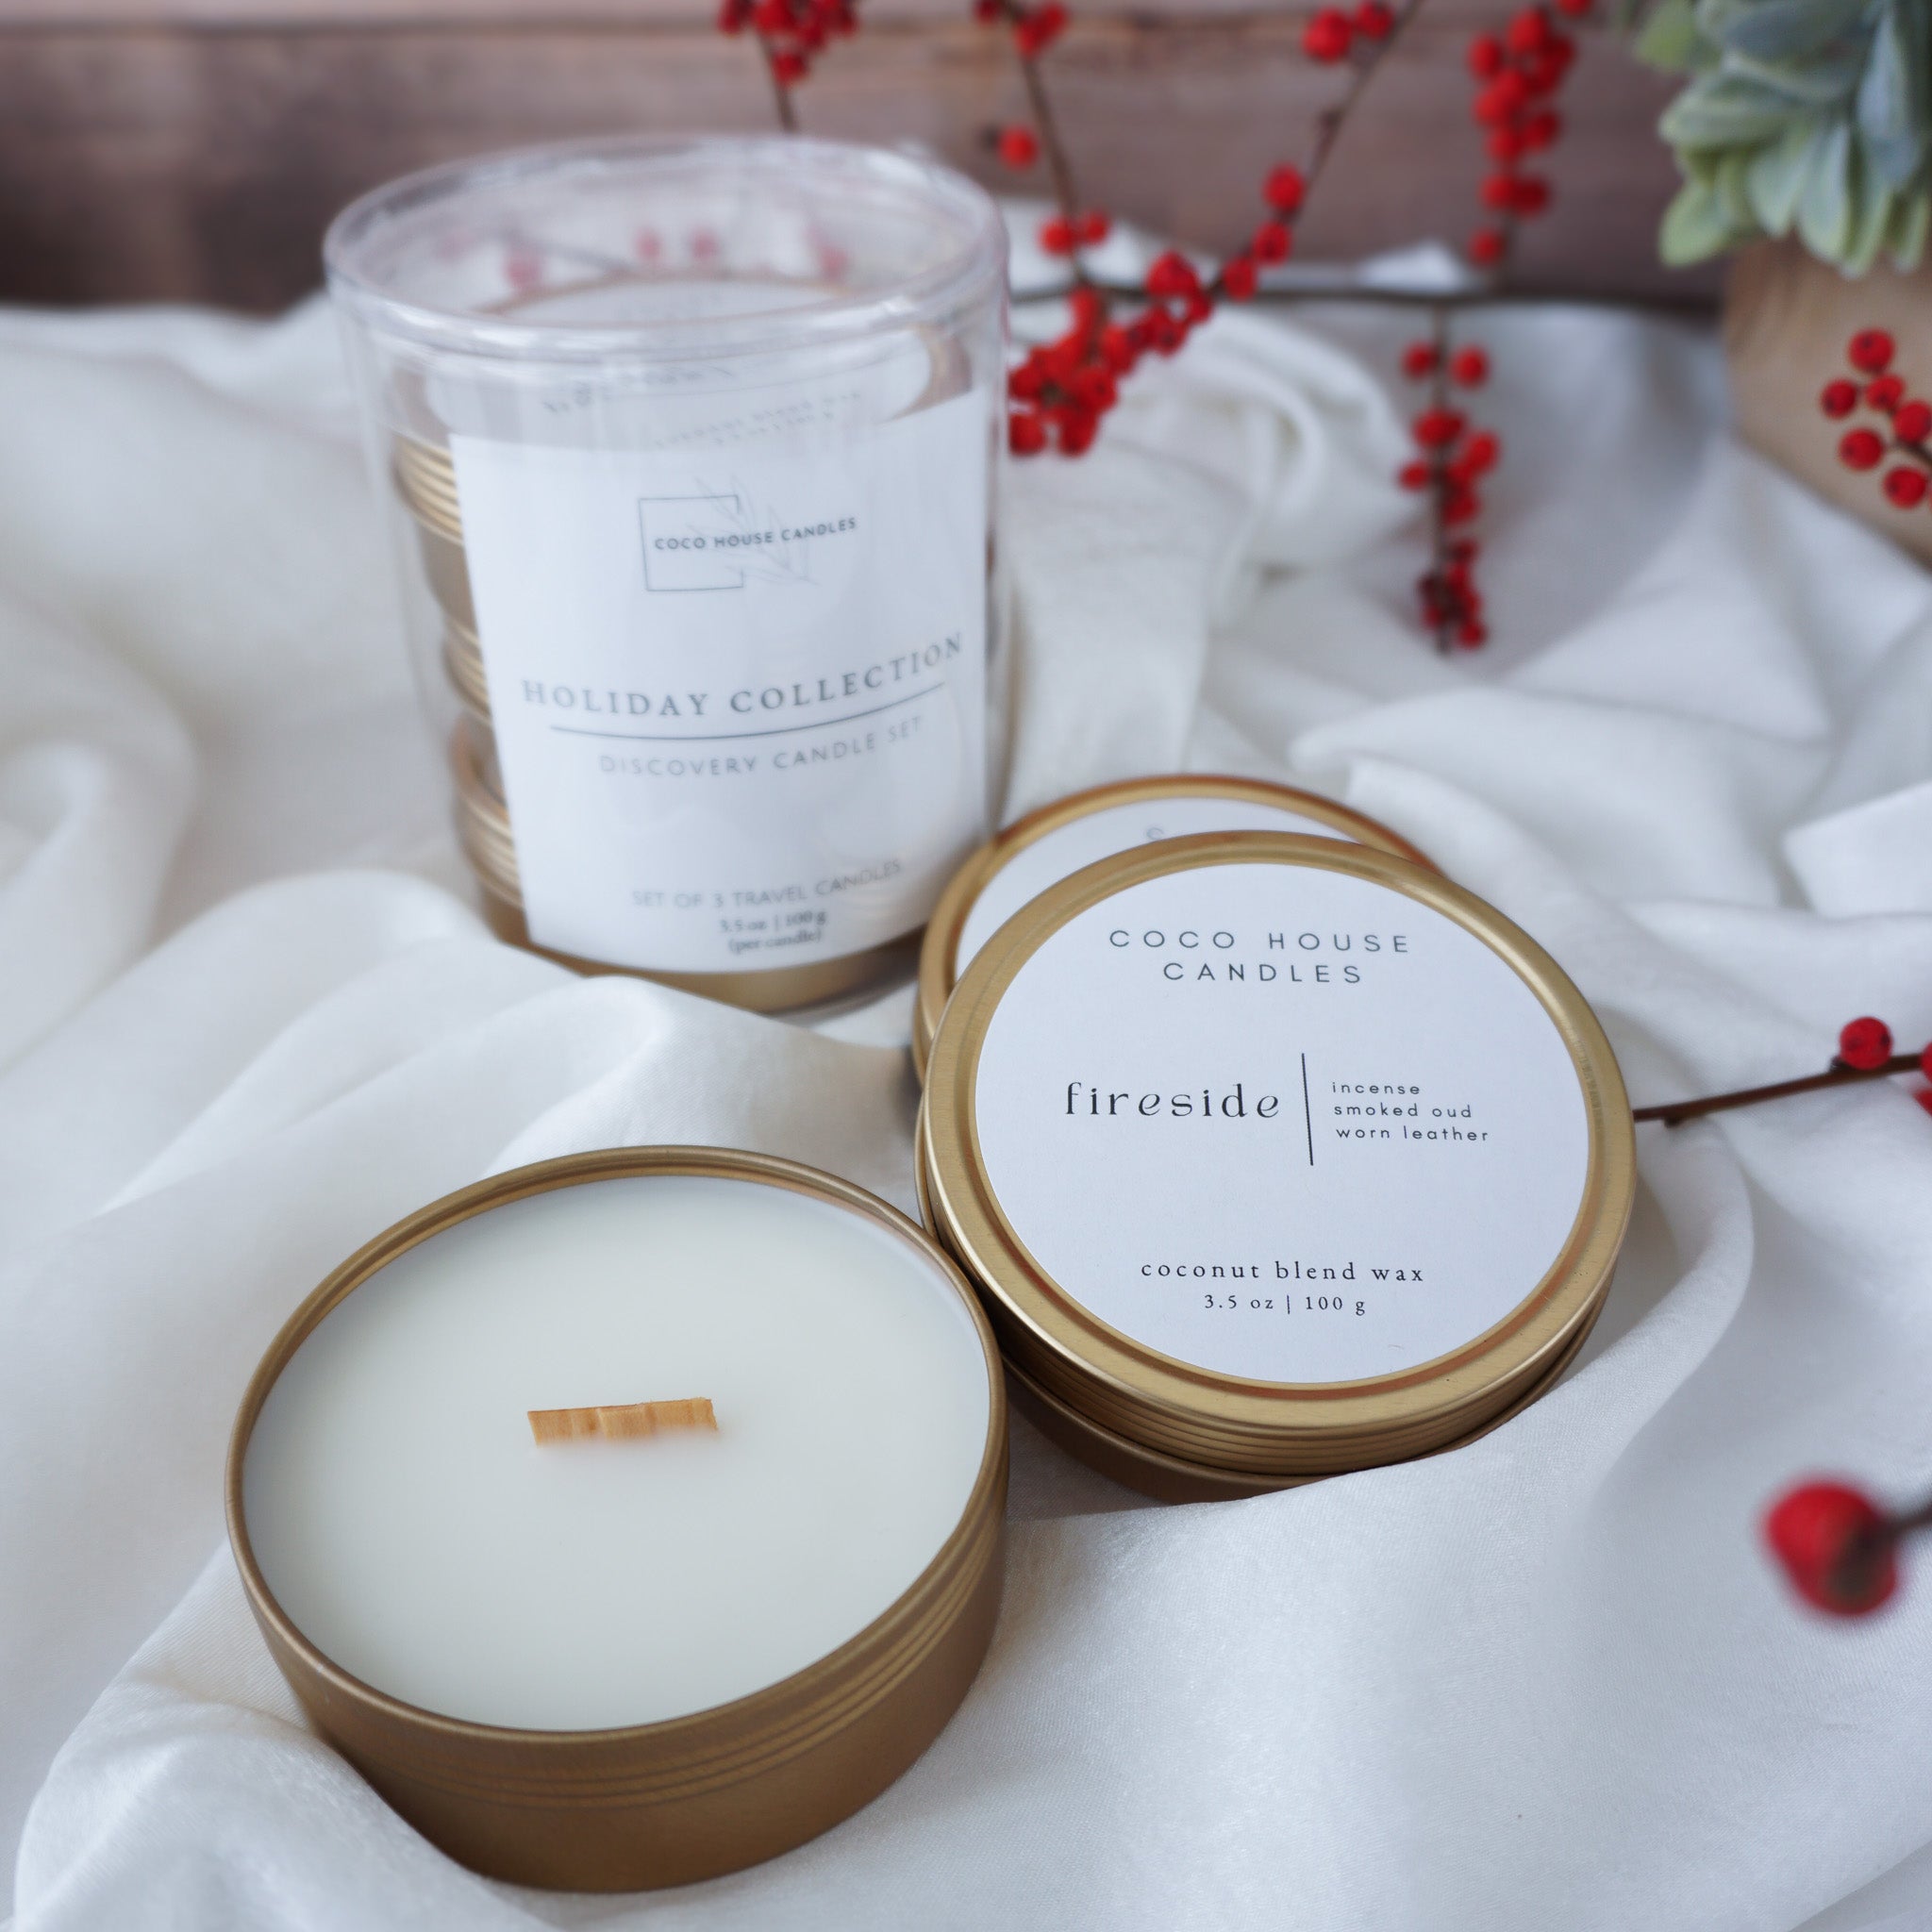 Holiday Travel Candle - Coco House Candles - Travel Candle